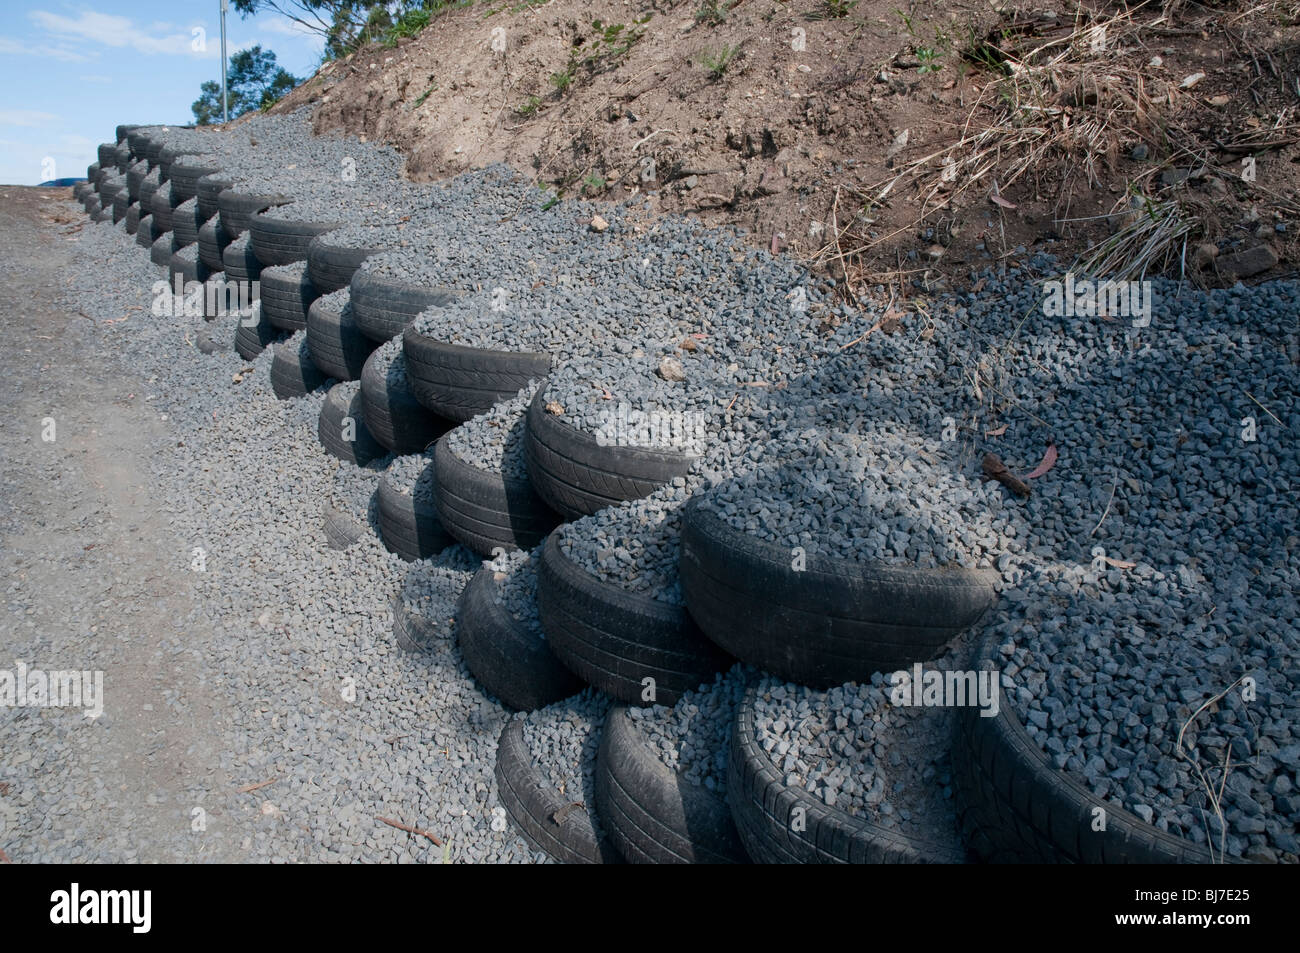 Recycled tyres and gravel used as a retaining wall on a driveway Stock Photo